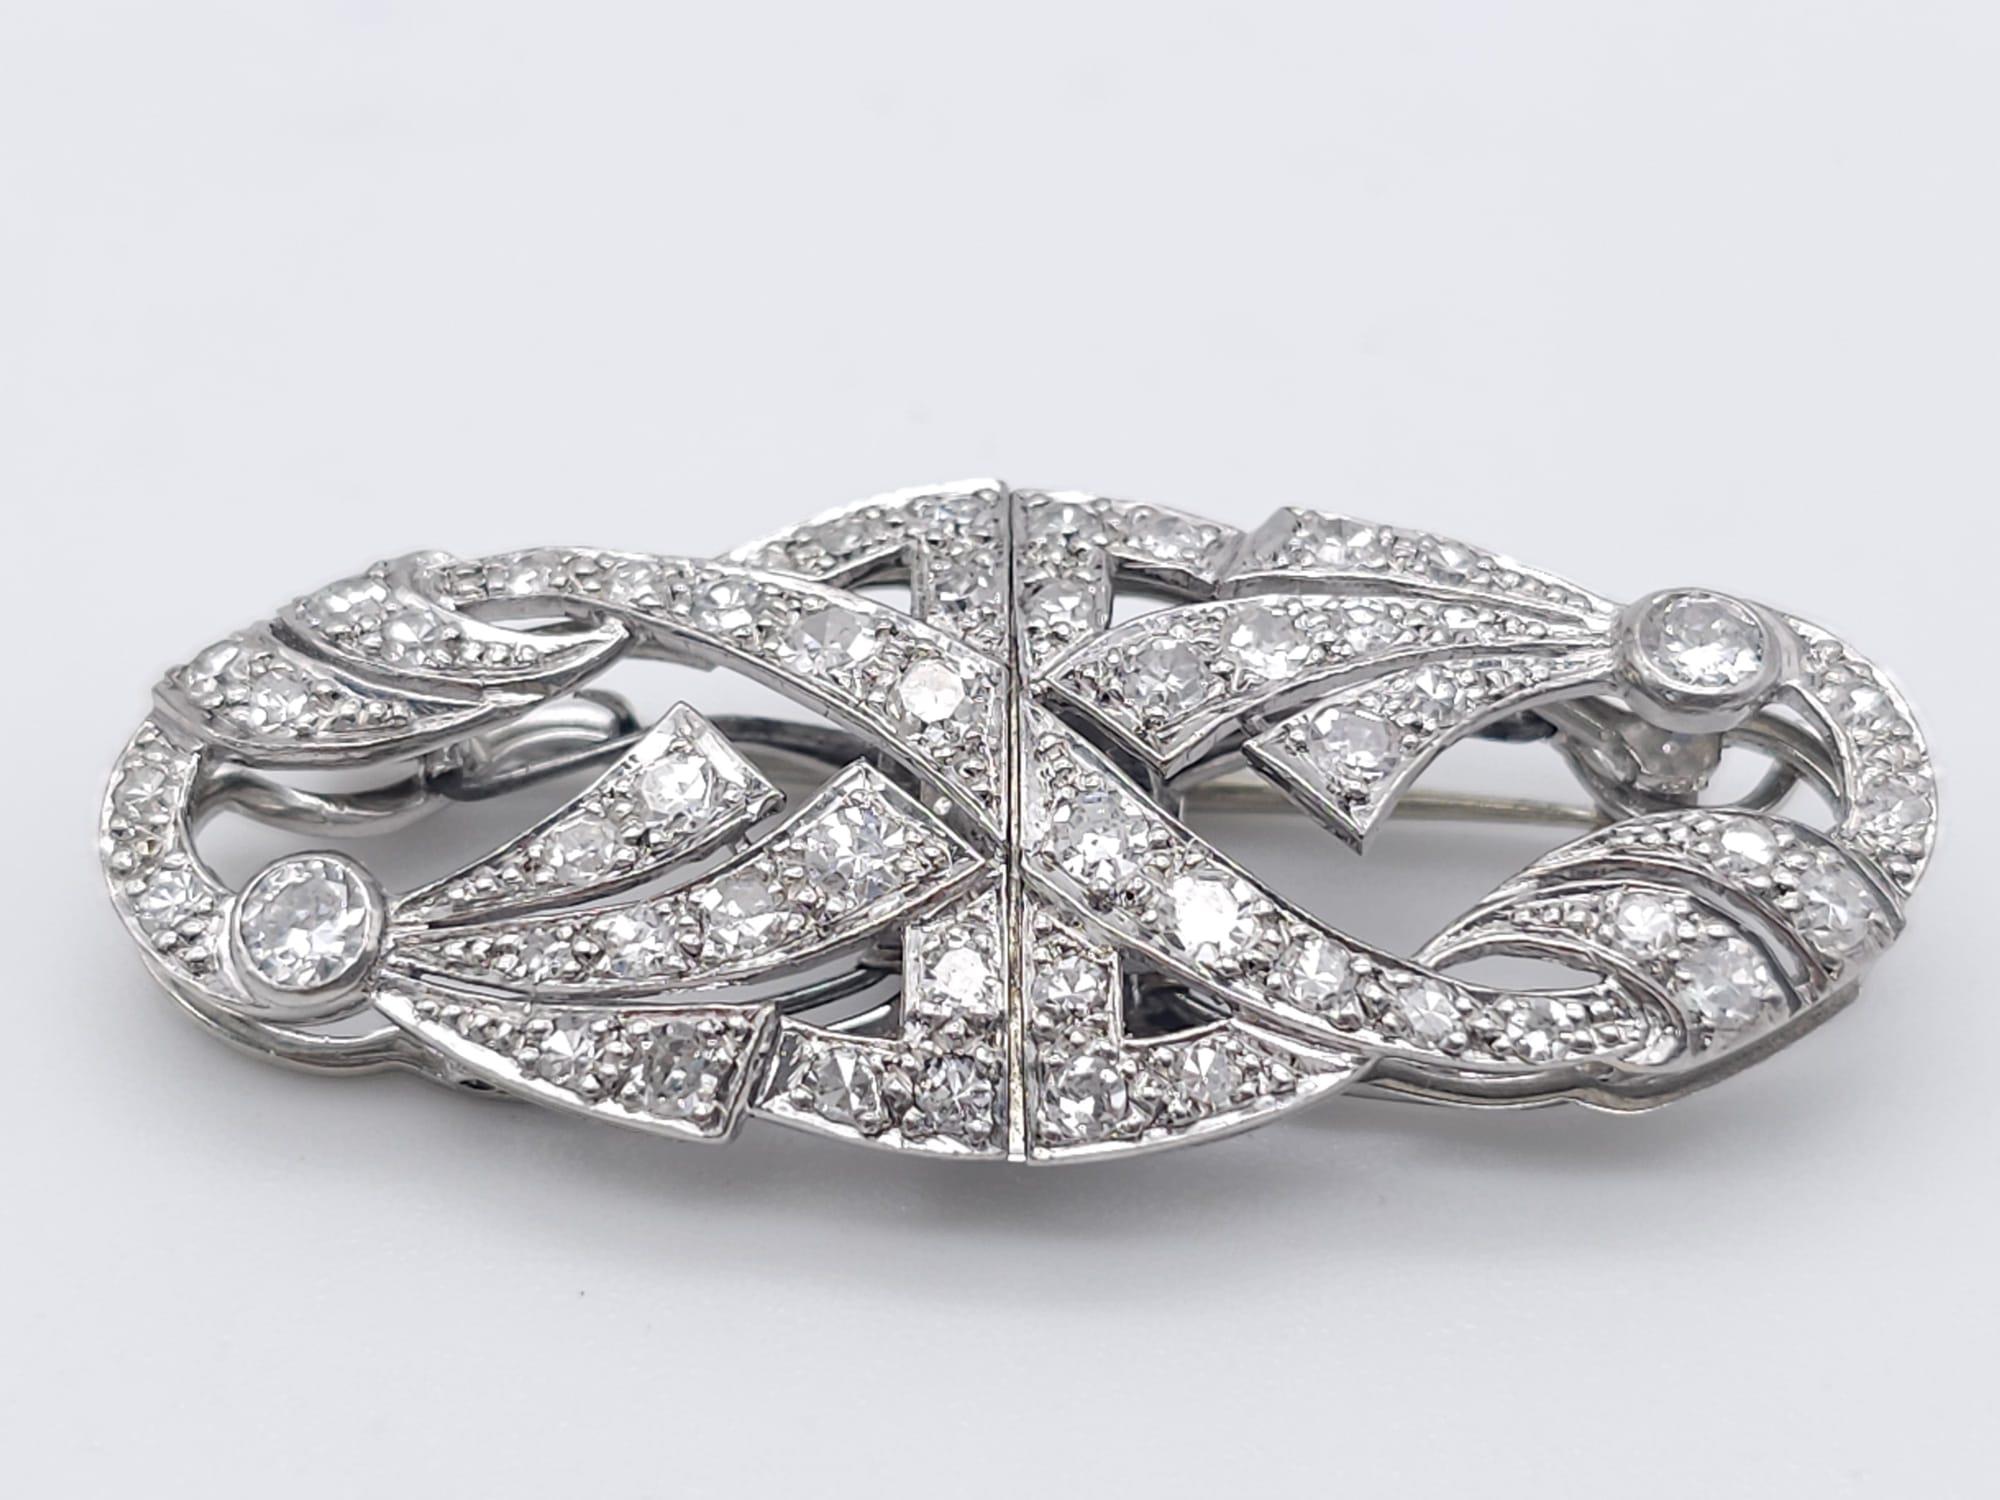 A 1920s Art Deco Platinum and Diamond Duette Brooch. 3.5ctw of bright round cut diamonds. Can be - Image 4 of 8